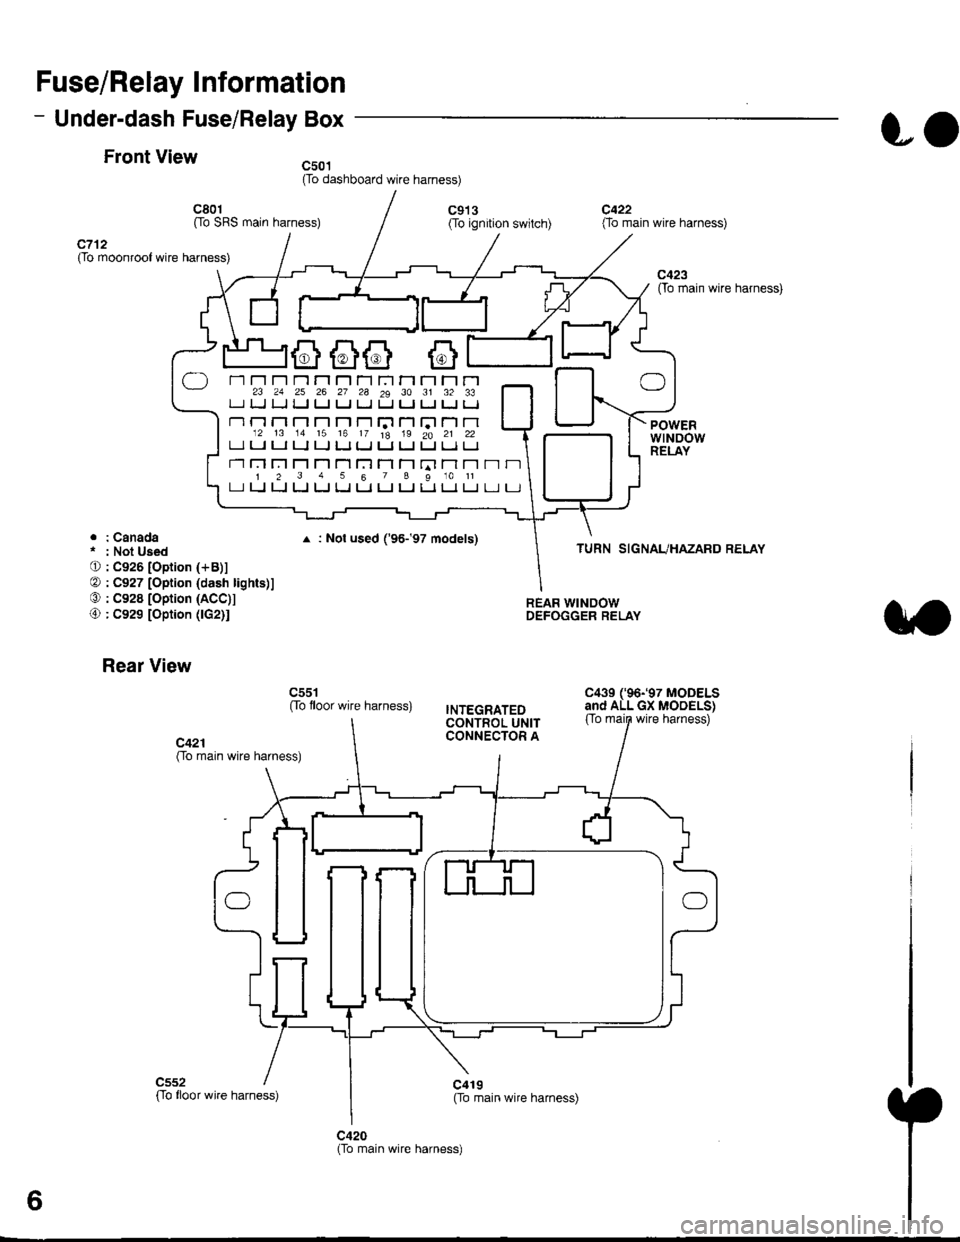 HONDA CIVIC 1996 6.G Owners Manual Fuse/Relay Information
- Under-dash Fuse/Relay Box
Front View
c712(To moonroof wire harness)
. : Canadai : Not UsedO : C926 loprion (+B)l
@ : C927 loption (dash lights)]
O : C928 [Option (ACC]I
@ : C9